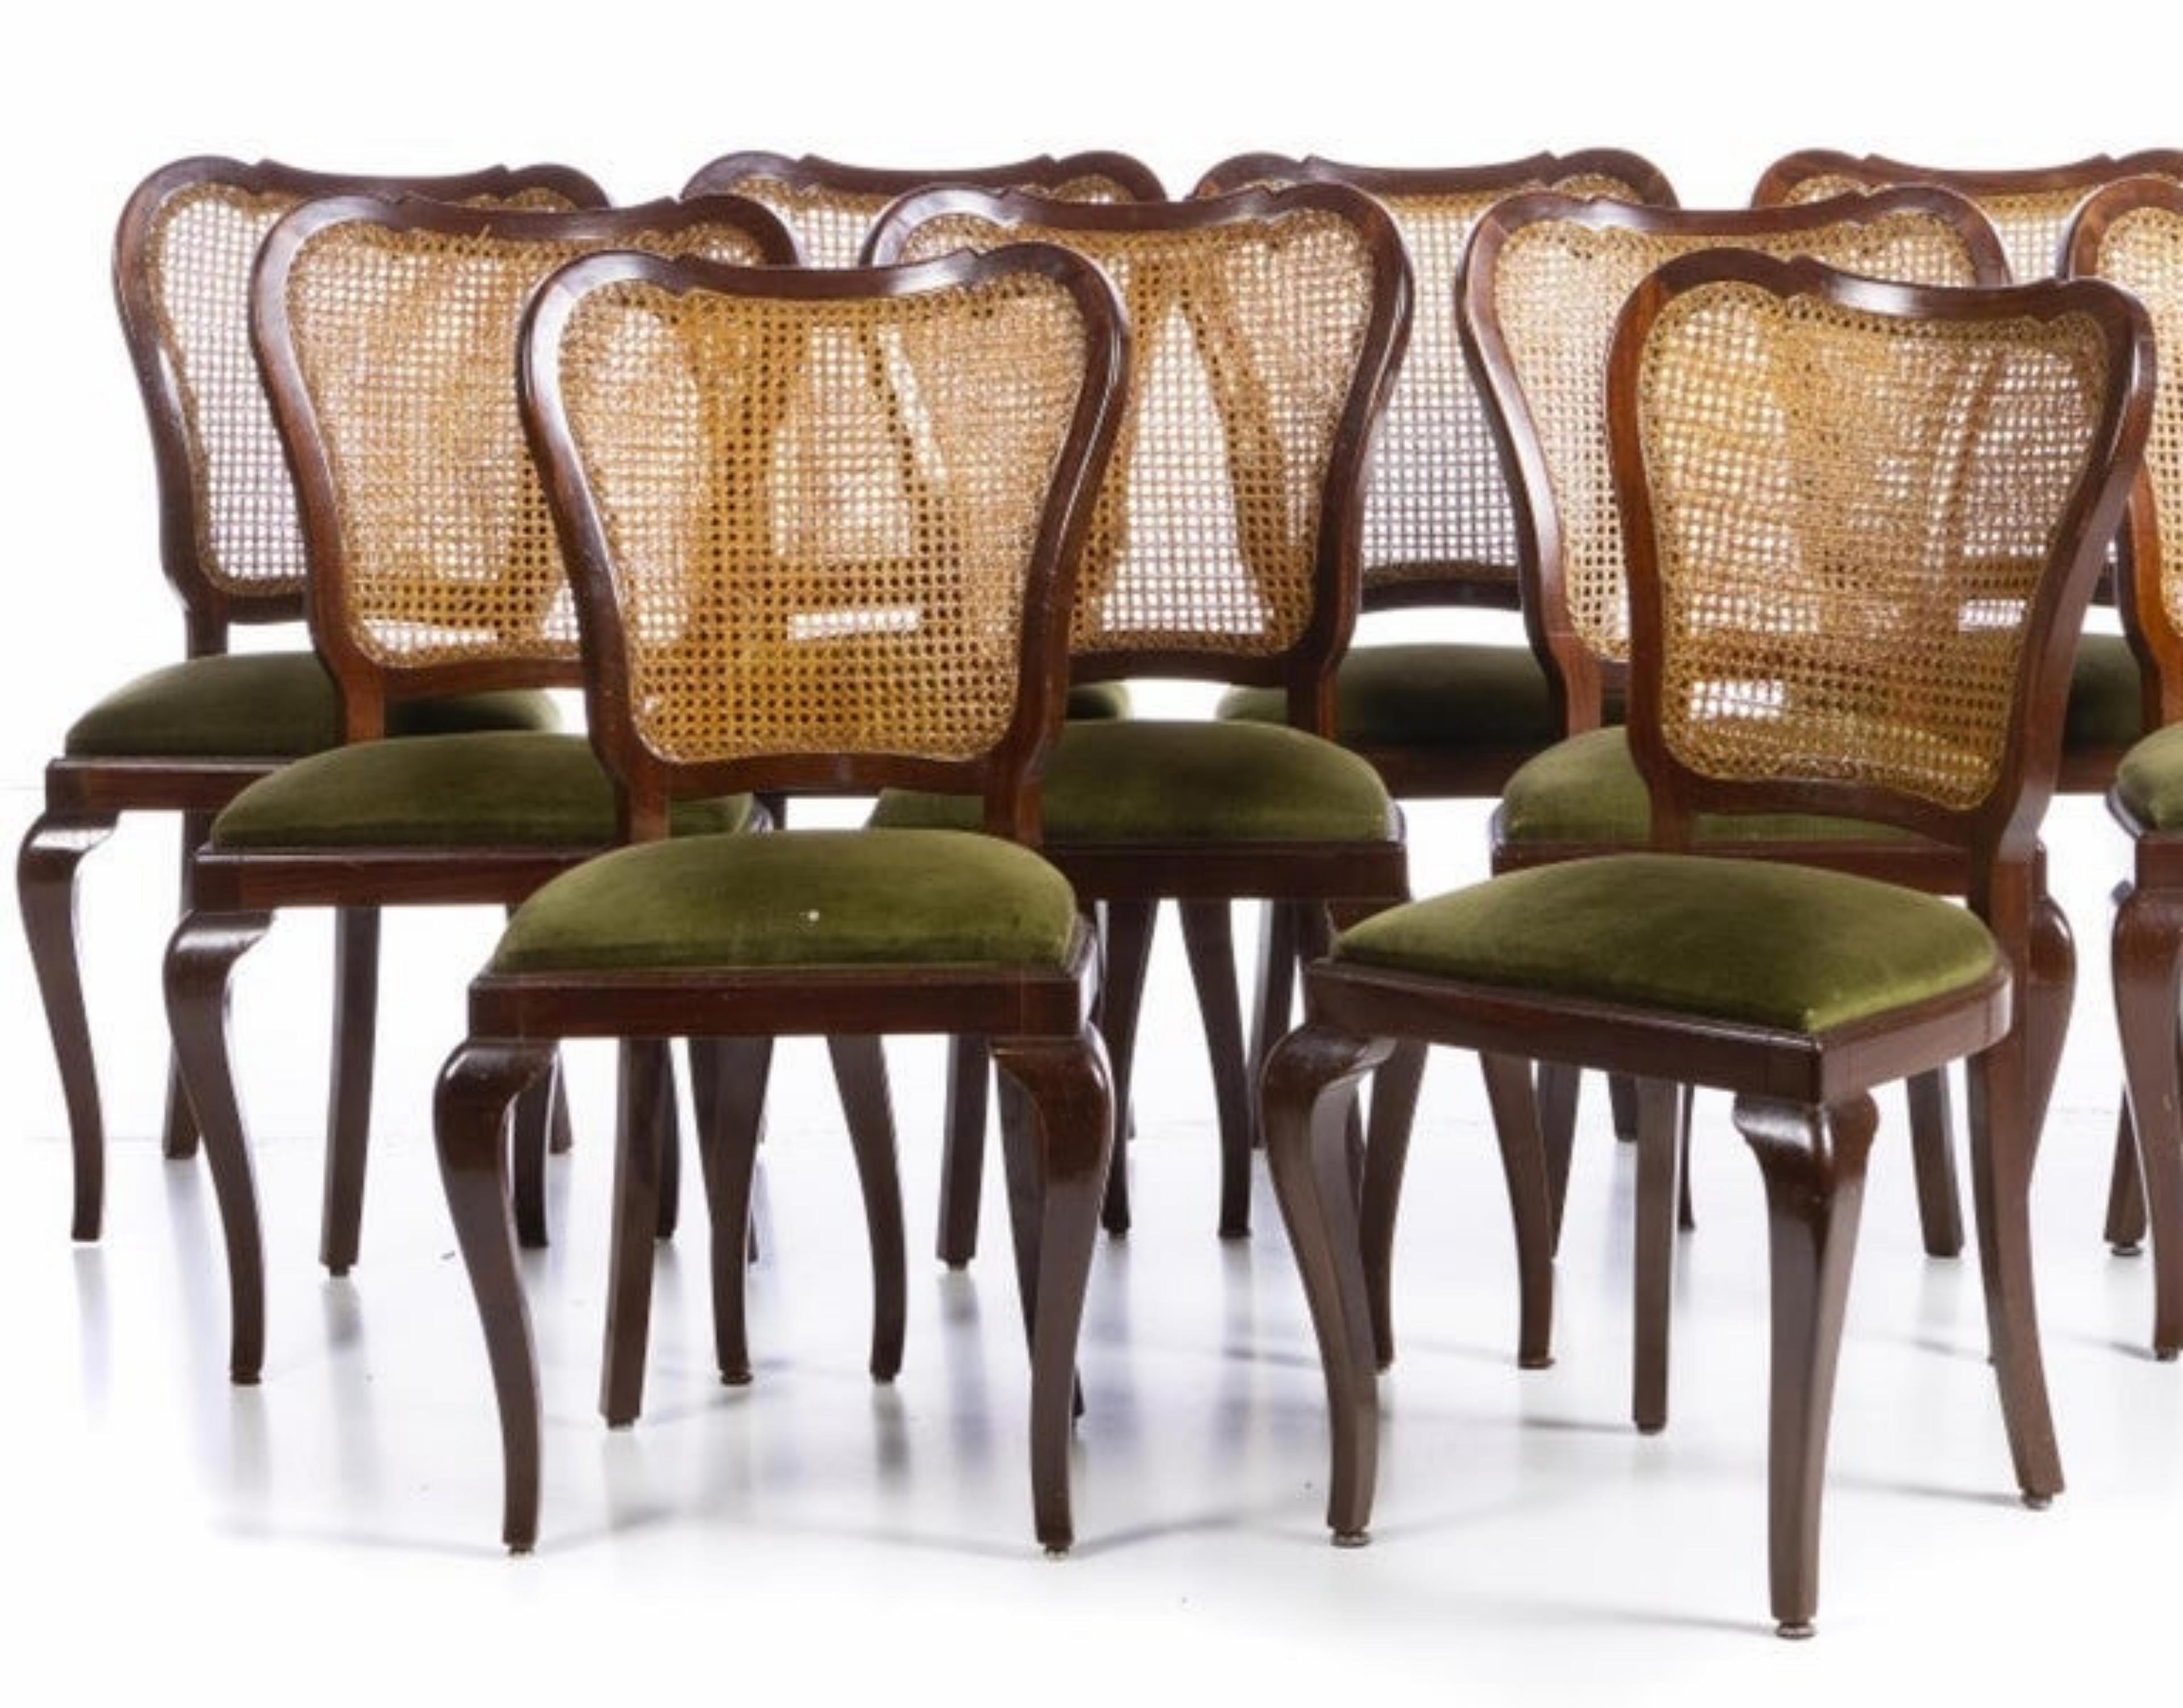 11 chairs
Portuguese from the 20th century, in mahogany wood with straw back, fabric seats. Signs of use. Dimensions: 90 x 50 x 42 cm.